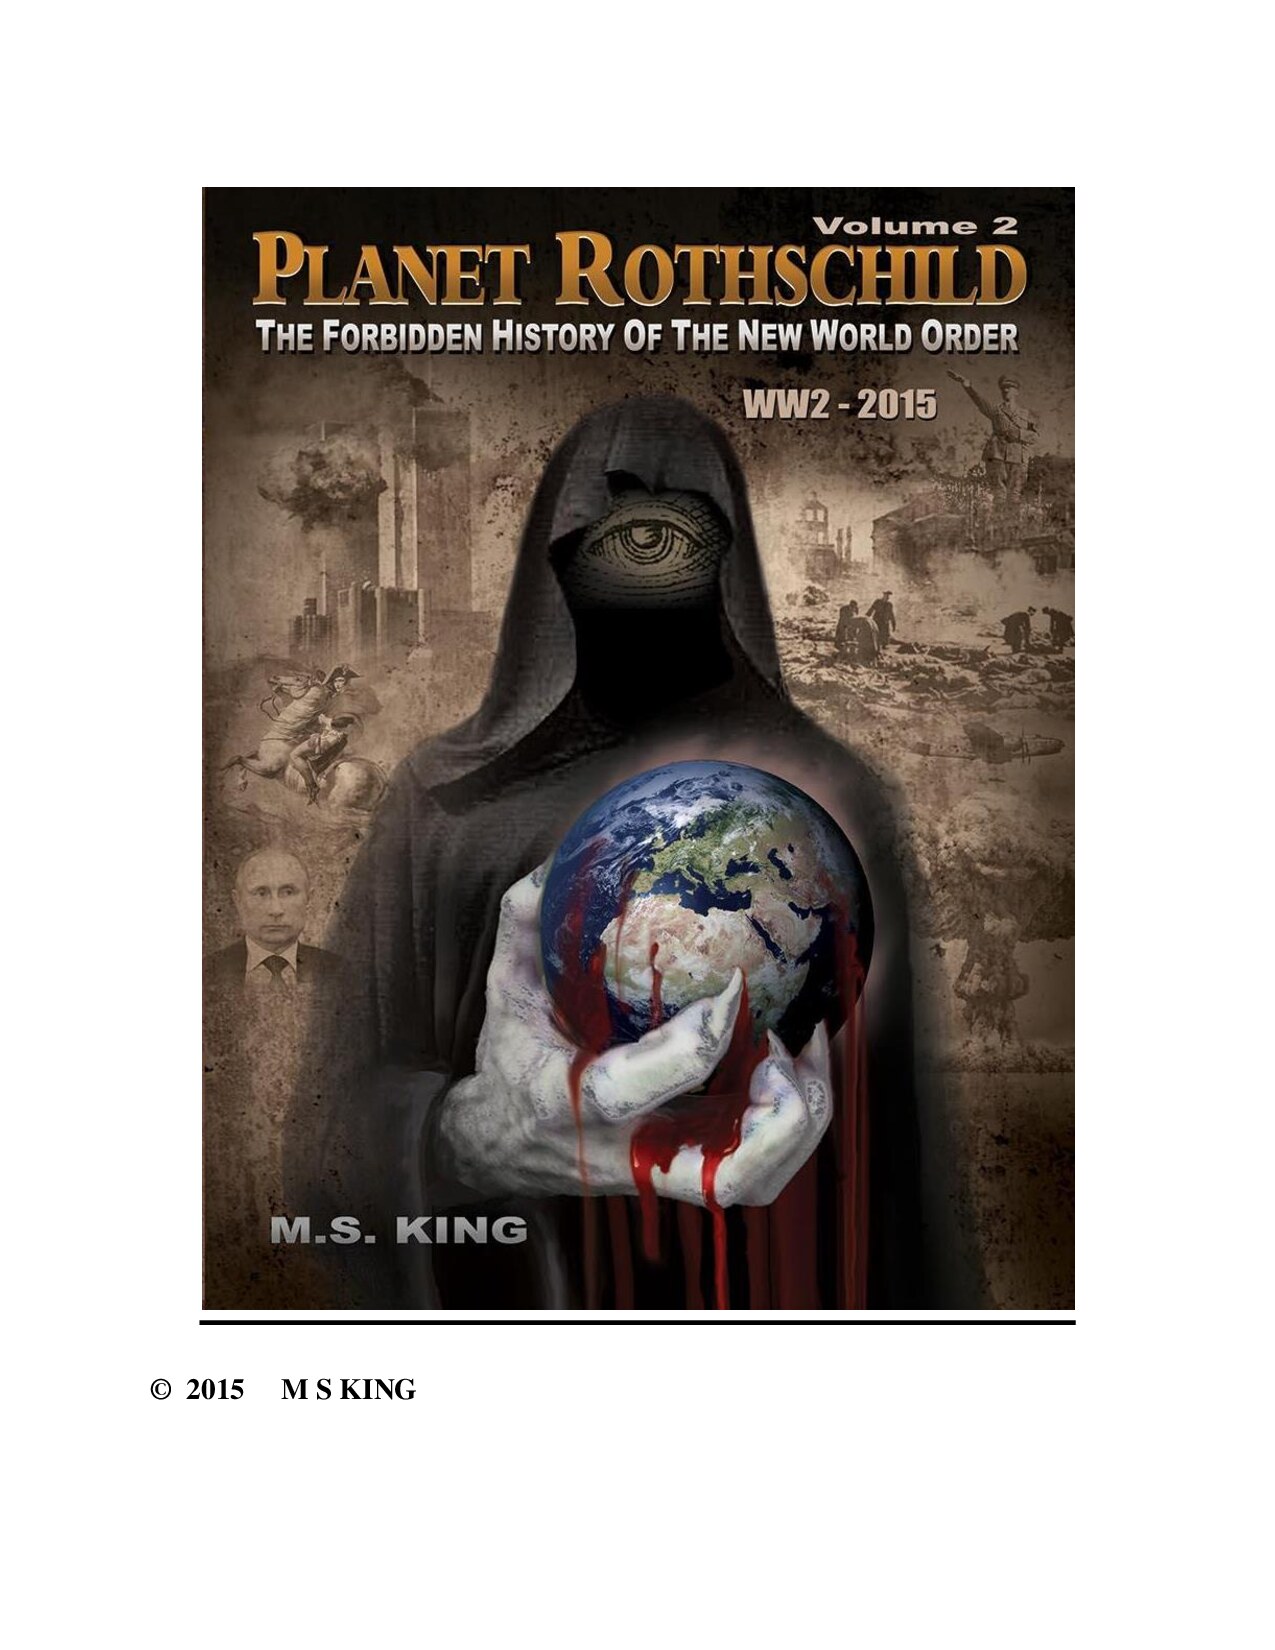 King, Mike S.; Planet Rothschild - The Forbidden History of the New World Order WW2-2015 (Part 2)